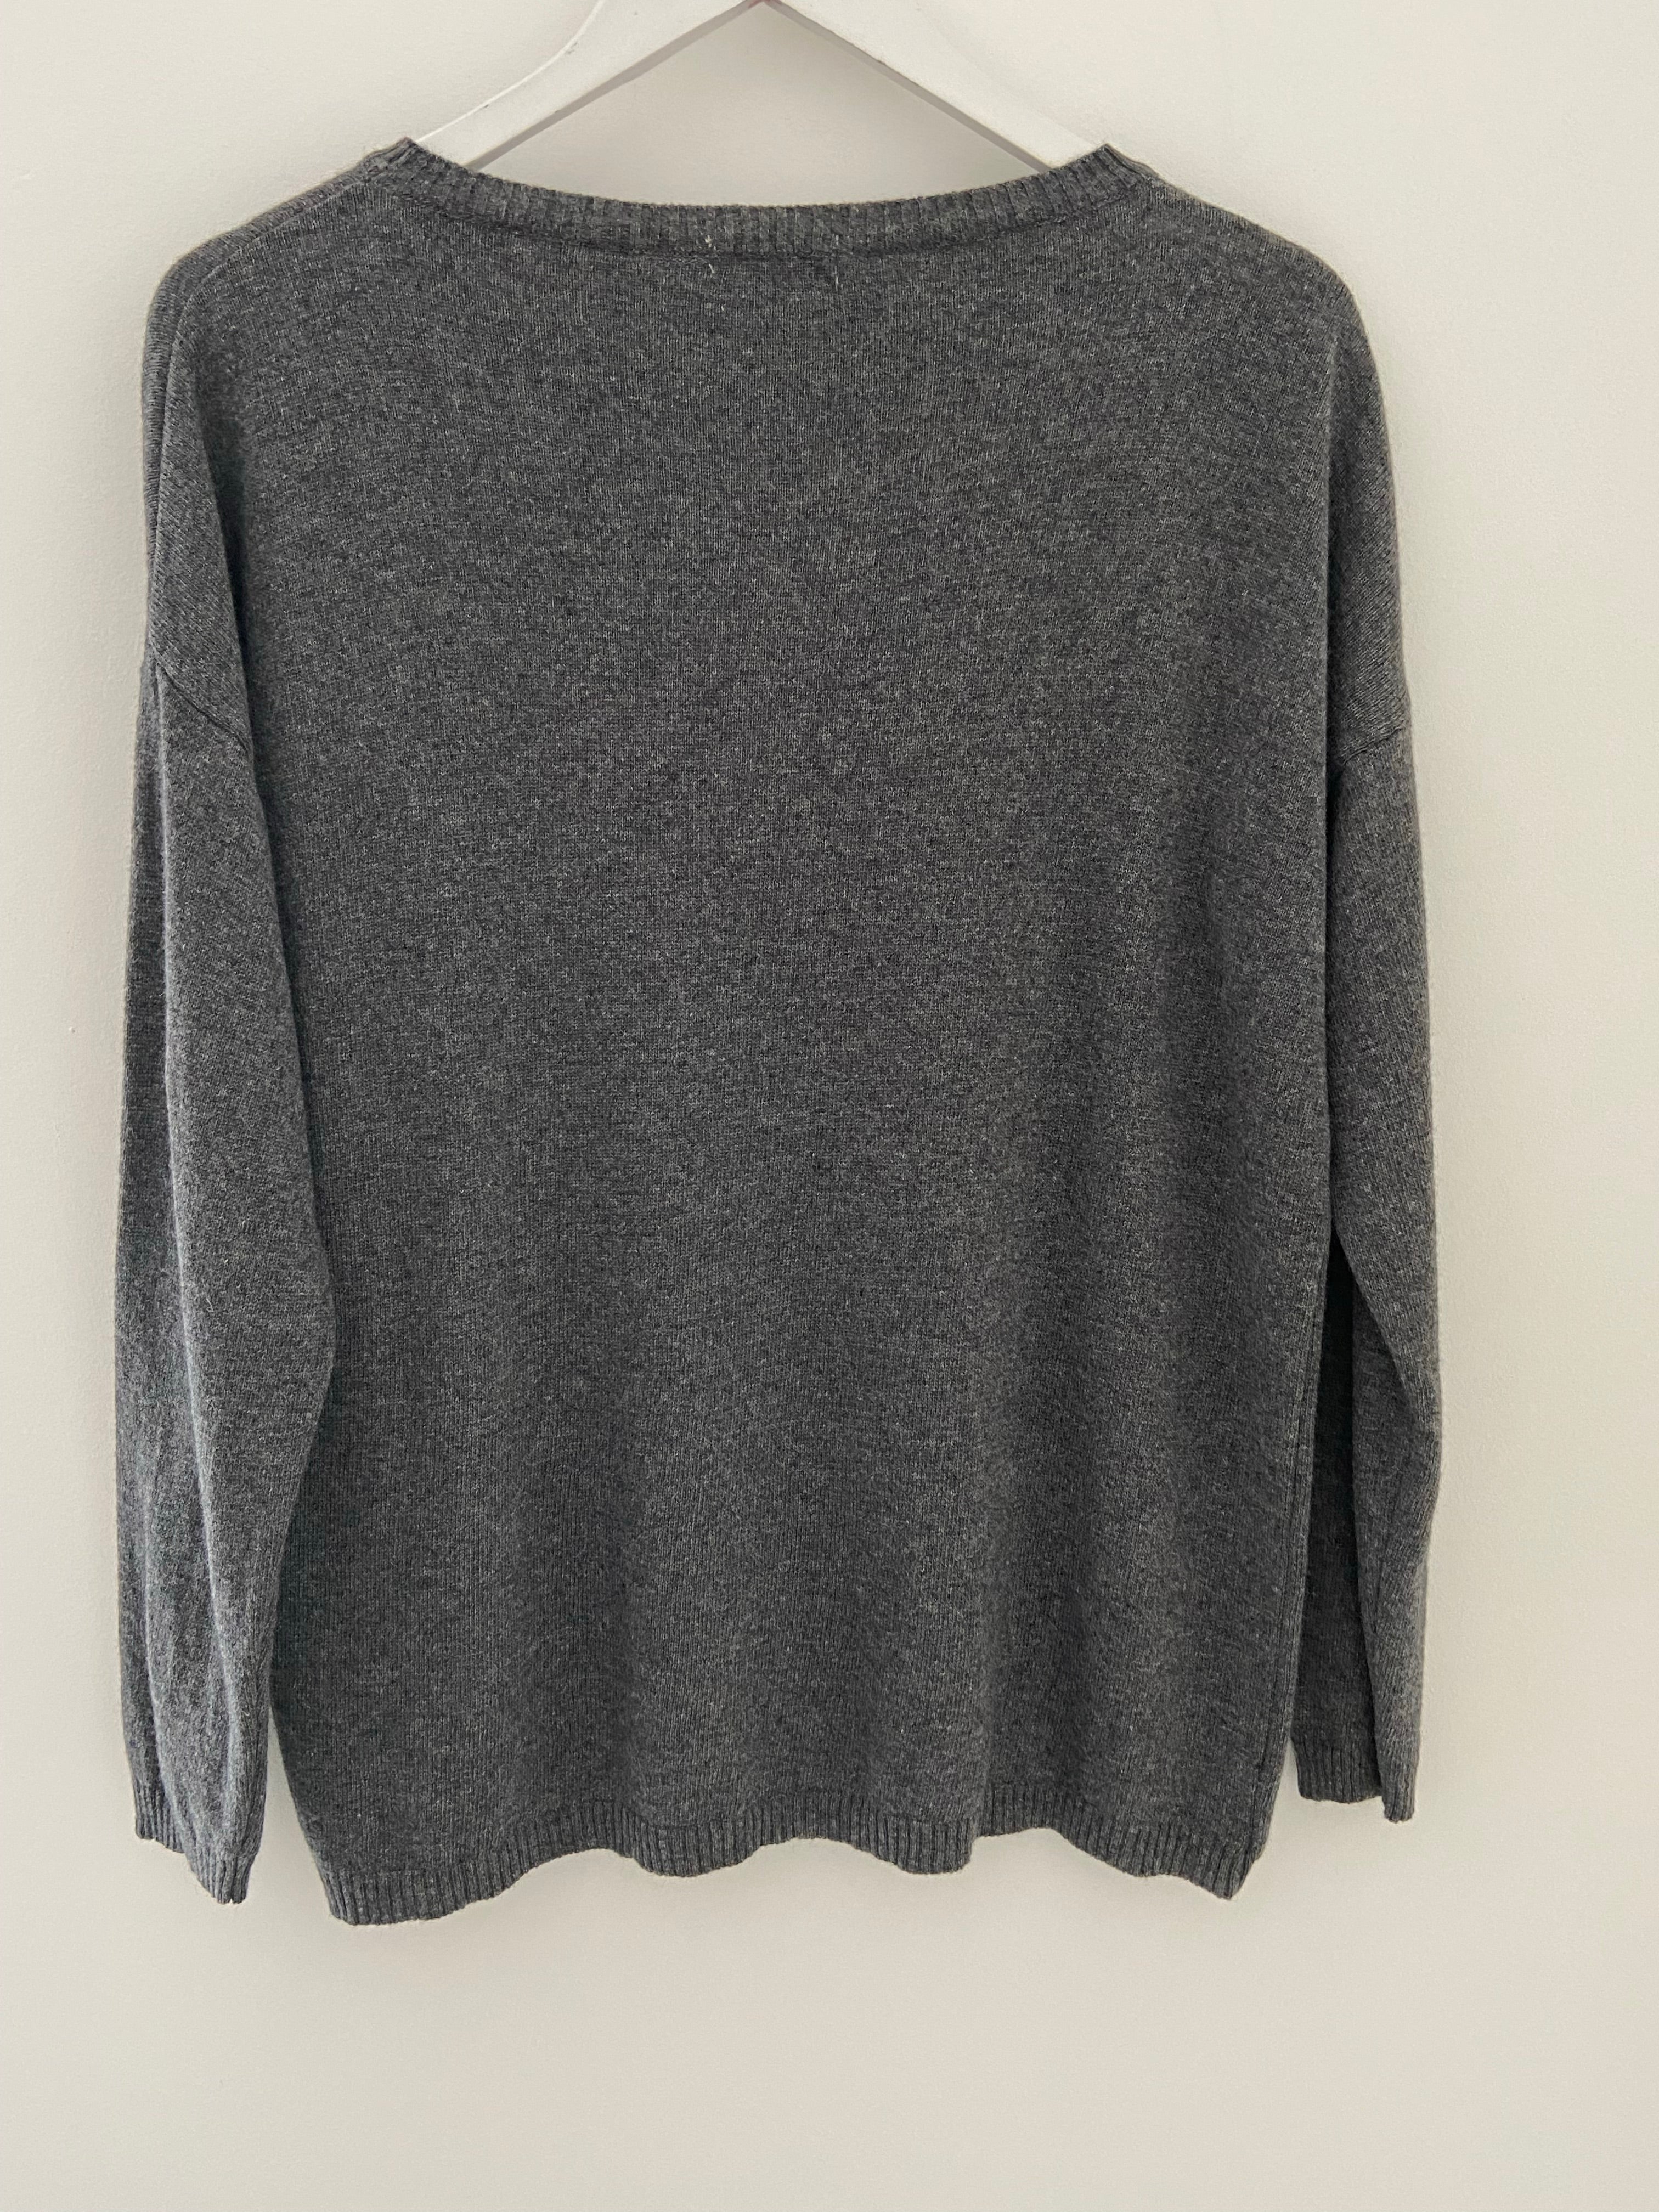 Star Cashmere Jumper in Charcoal & Pink